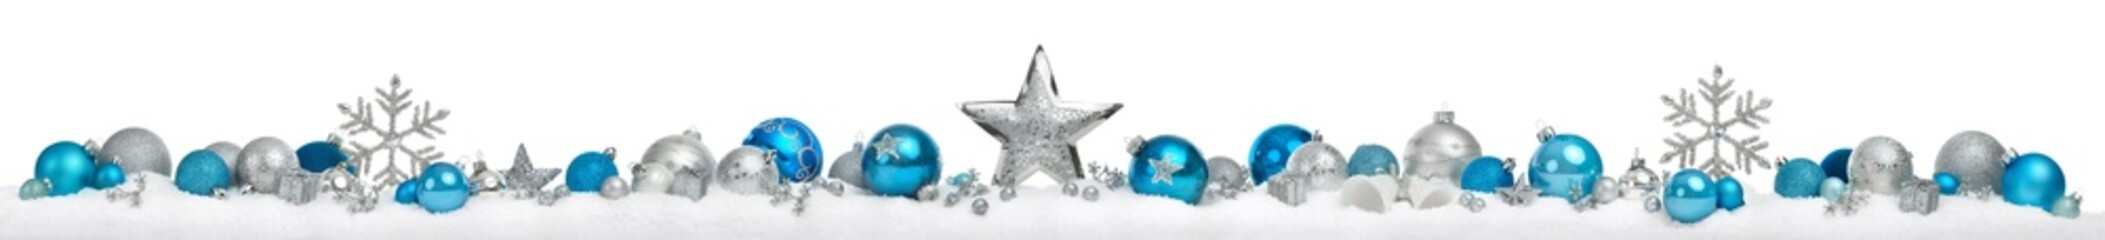 Christmas border or banner with stars and baubles arranged in a row on snow, silver and blue, extra...